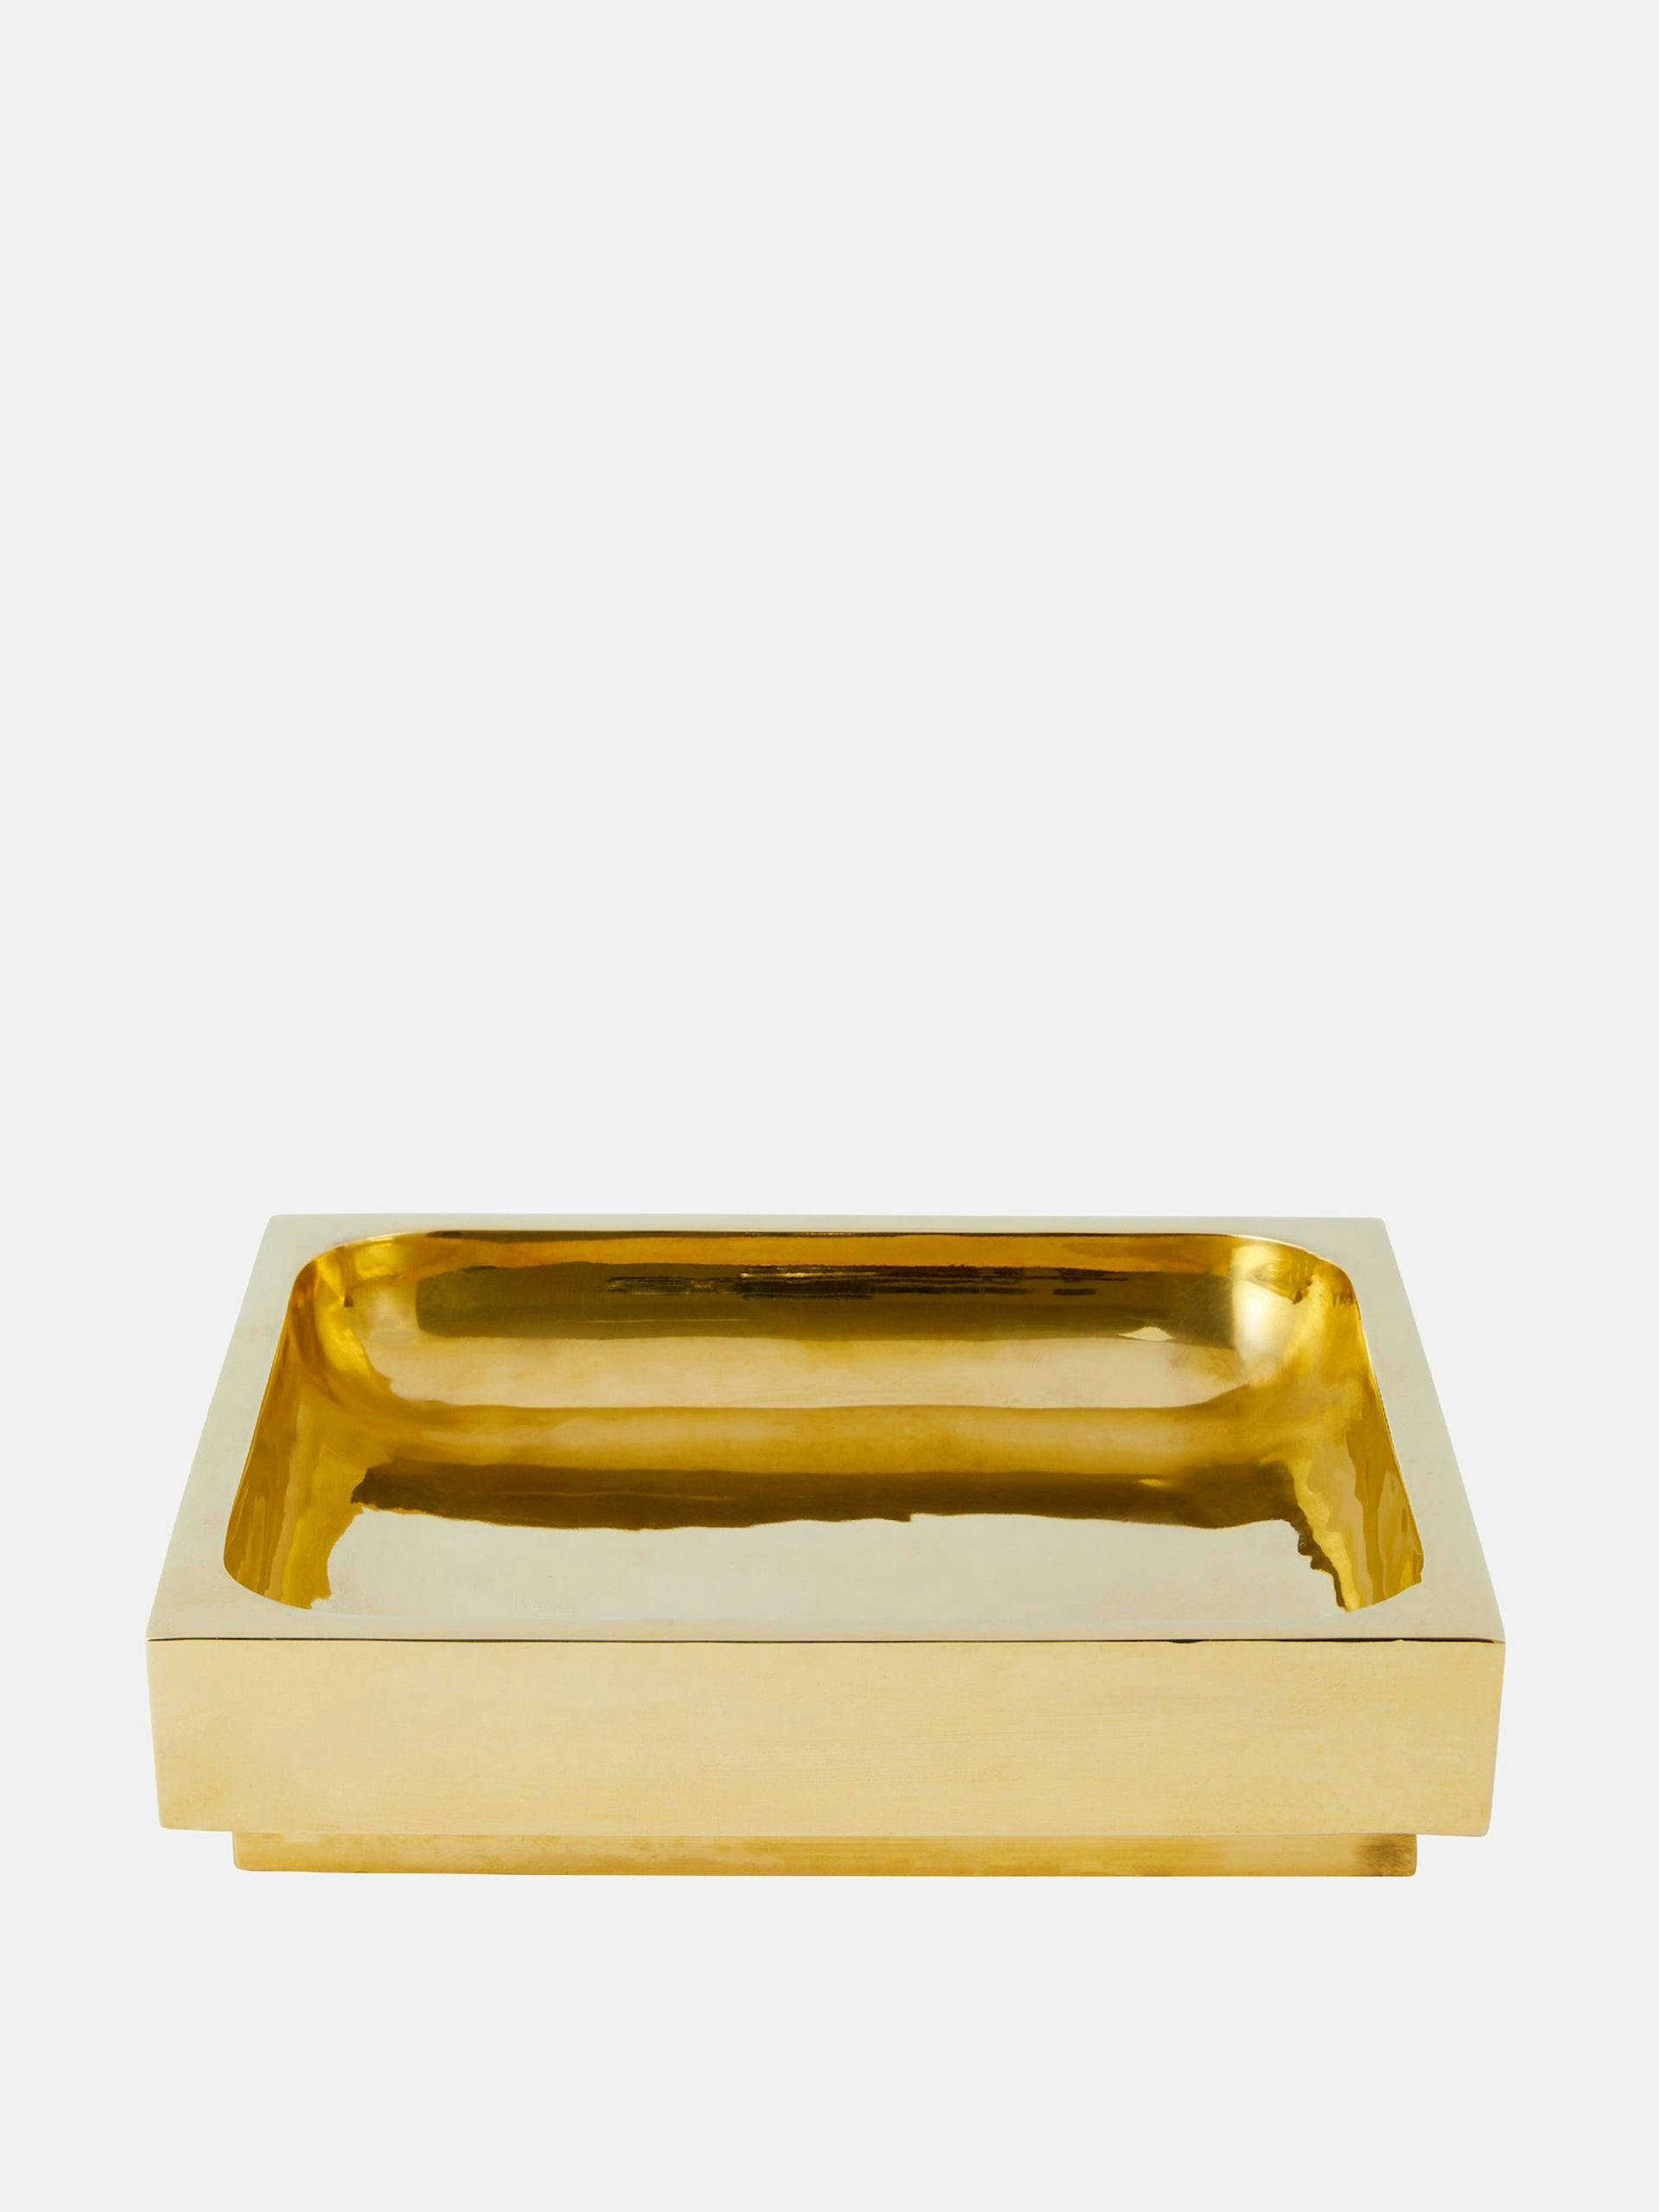 Square gold tray